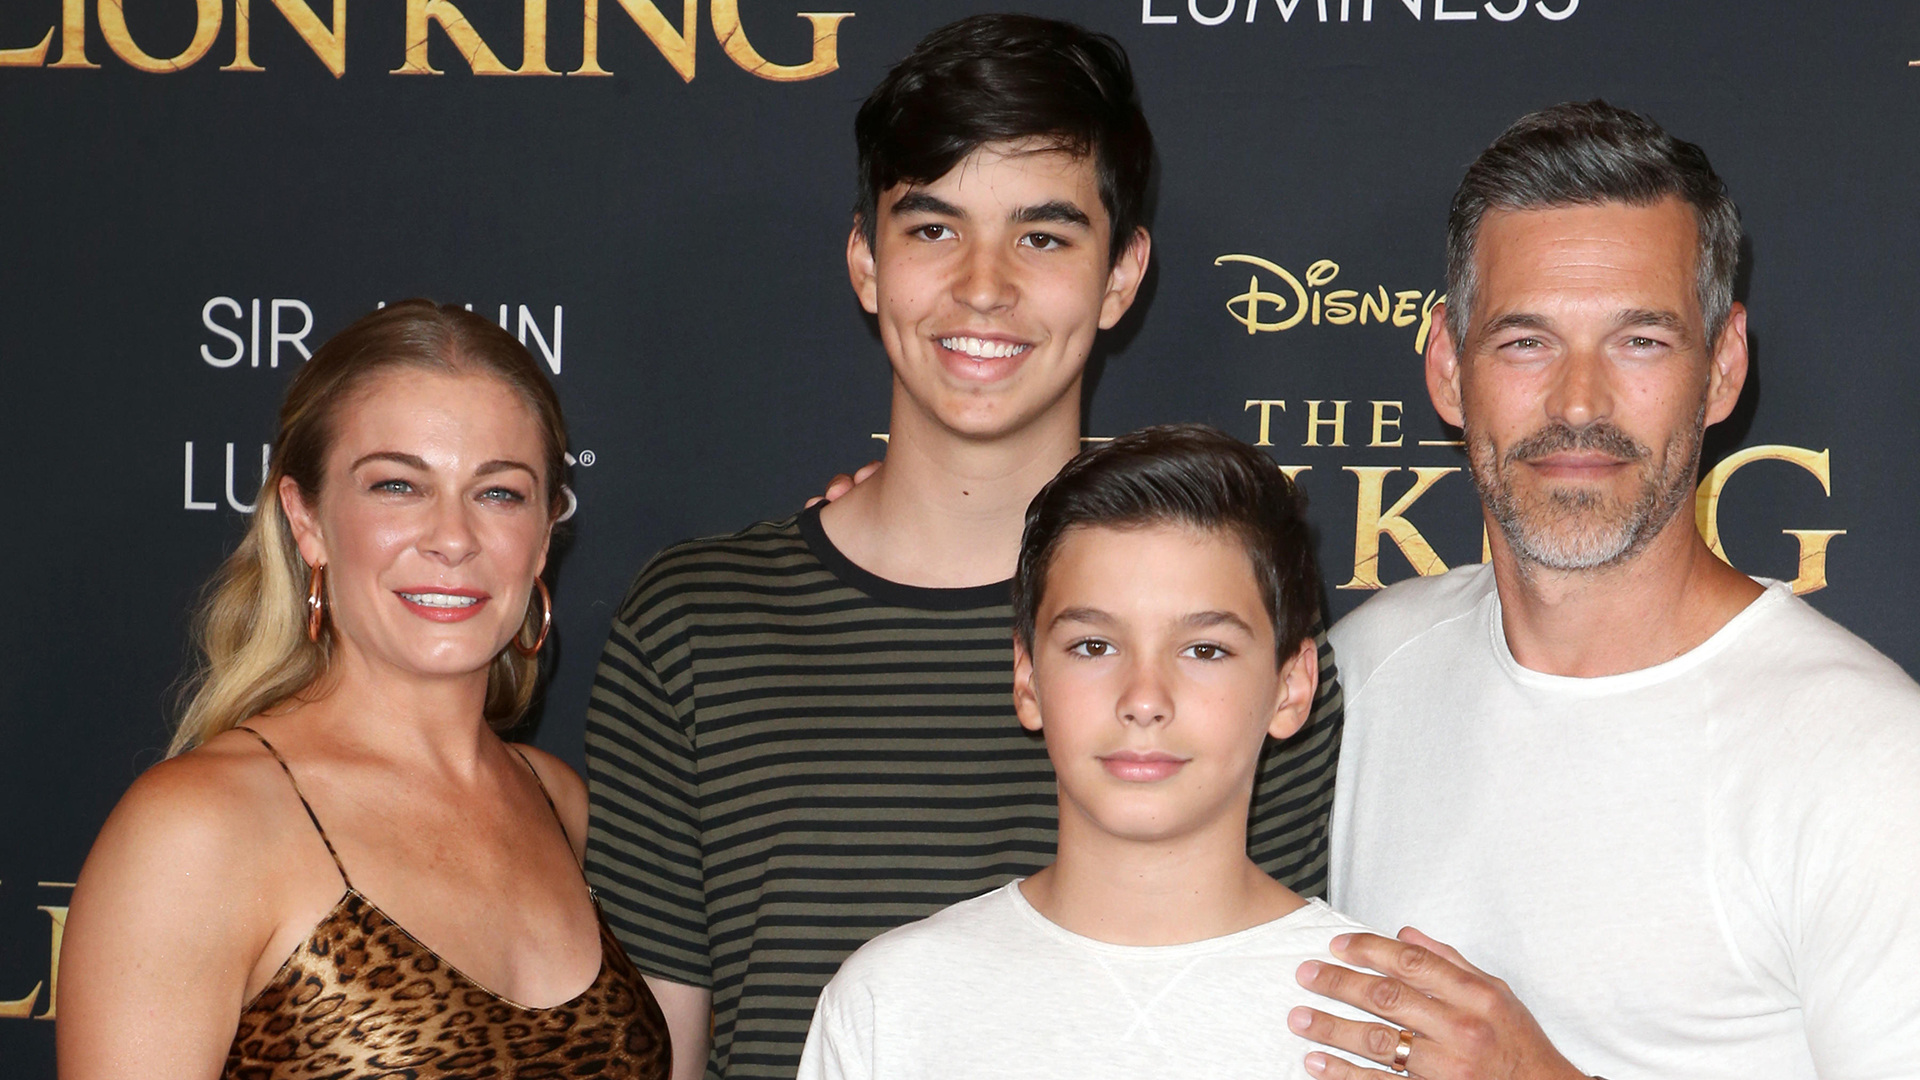 2019 - LeAnn Rimes at The Lion King film premiere in Hollywood with husband Eddie Cibrian and her two stepsons.